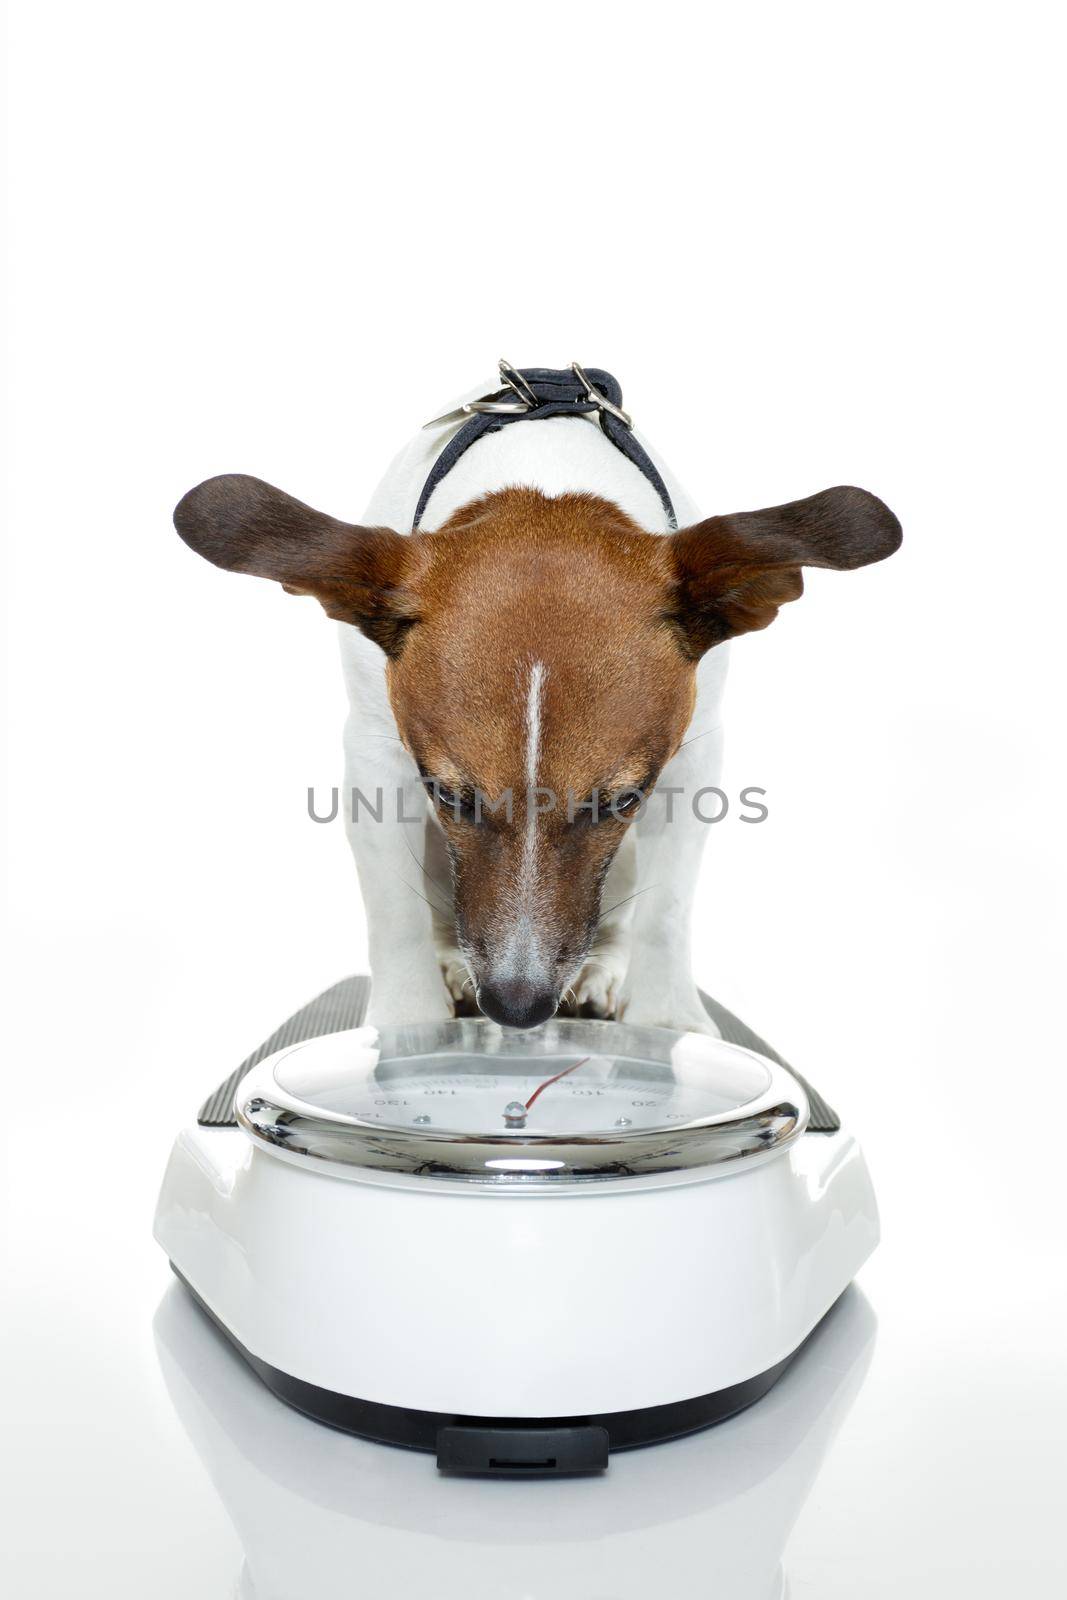 dog on scale by Brosch